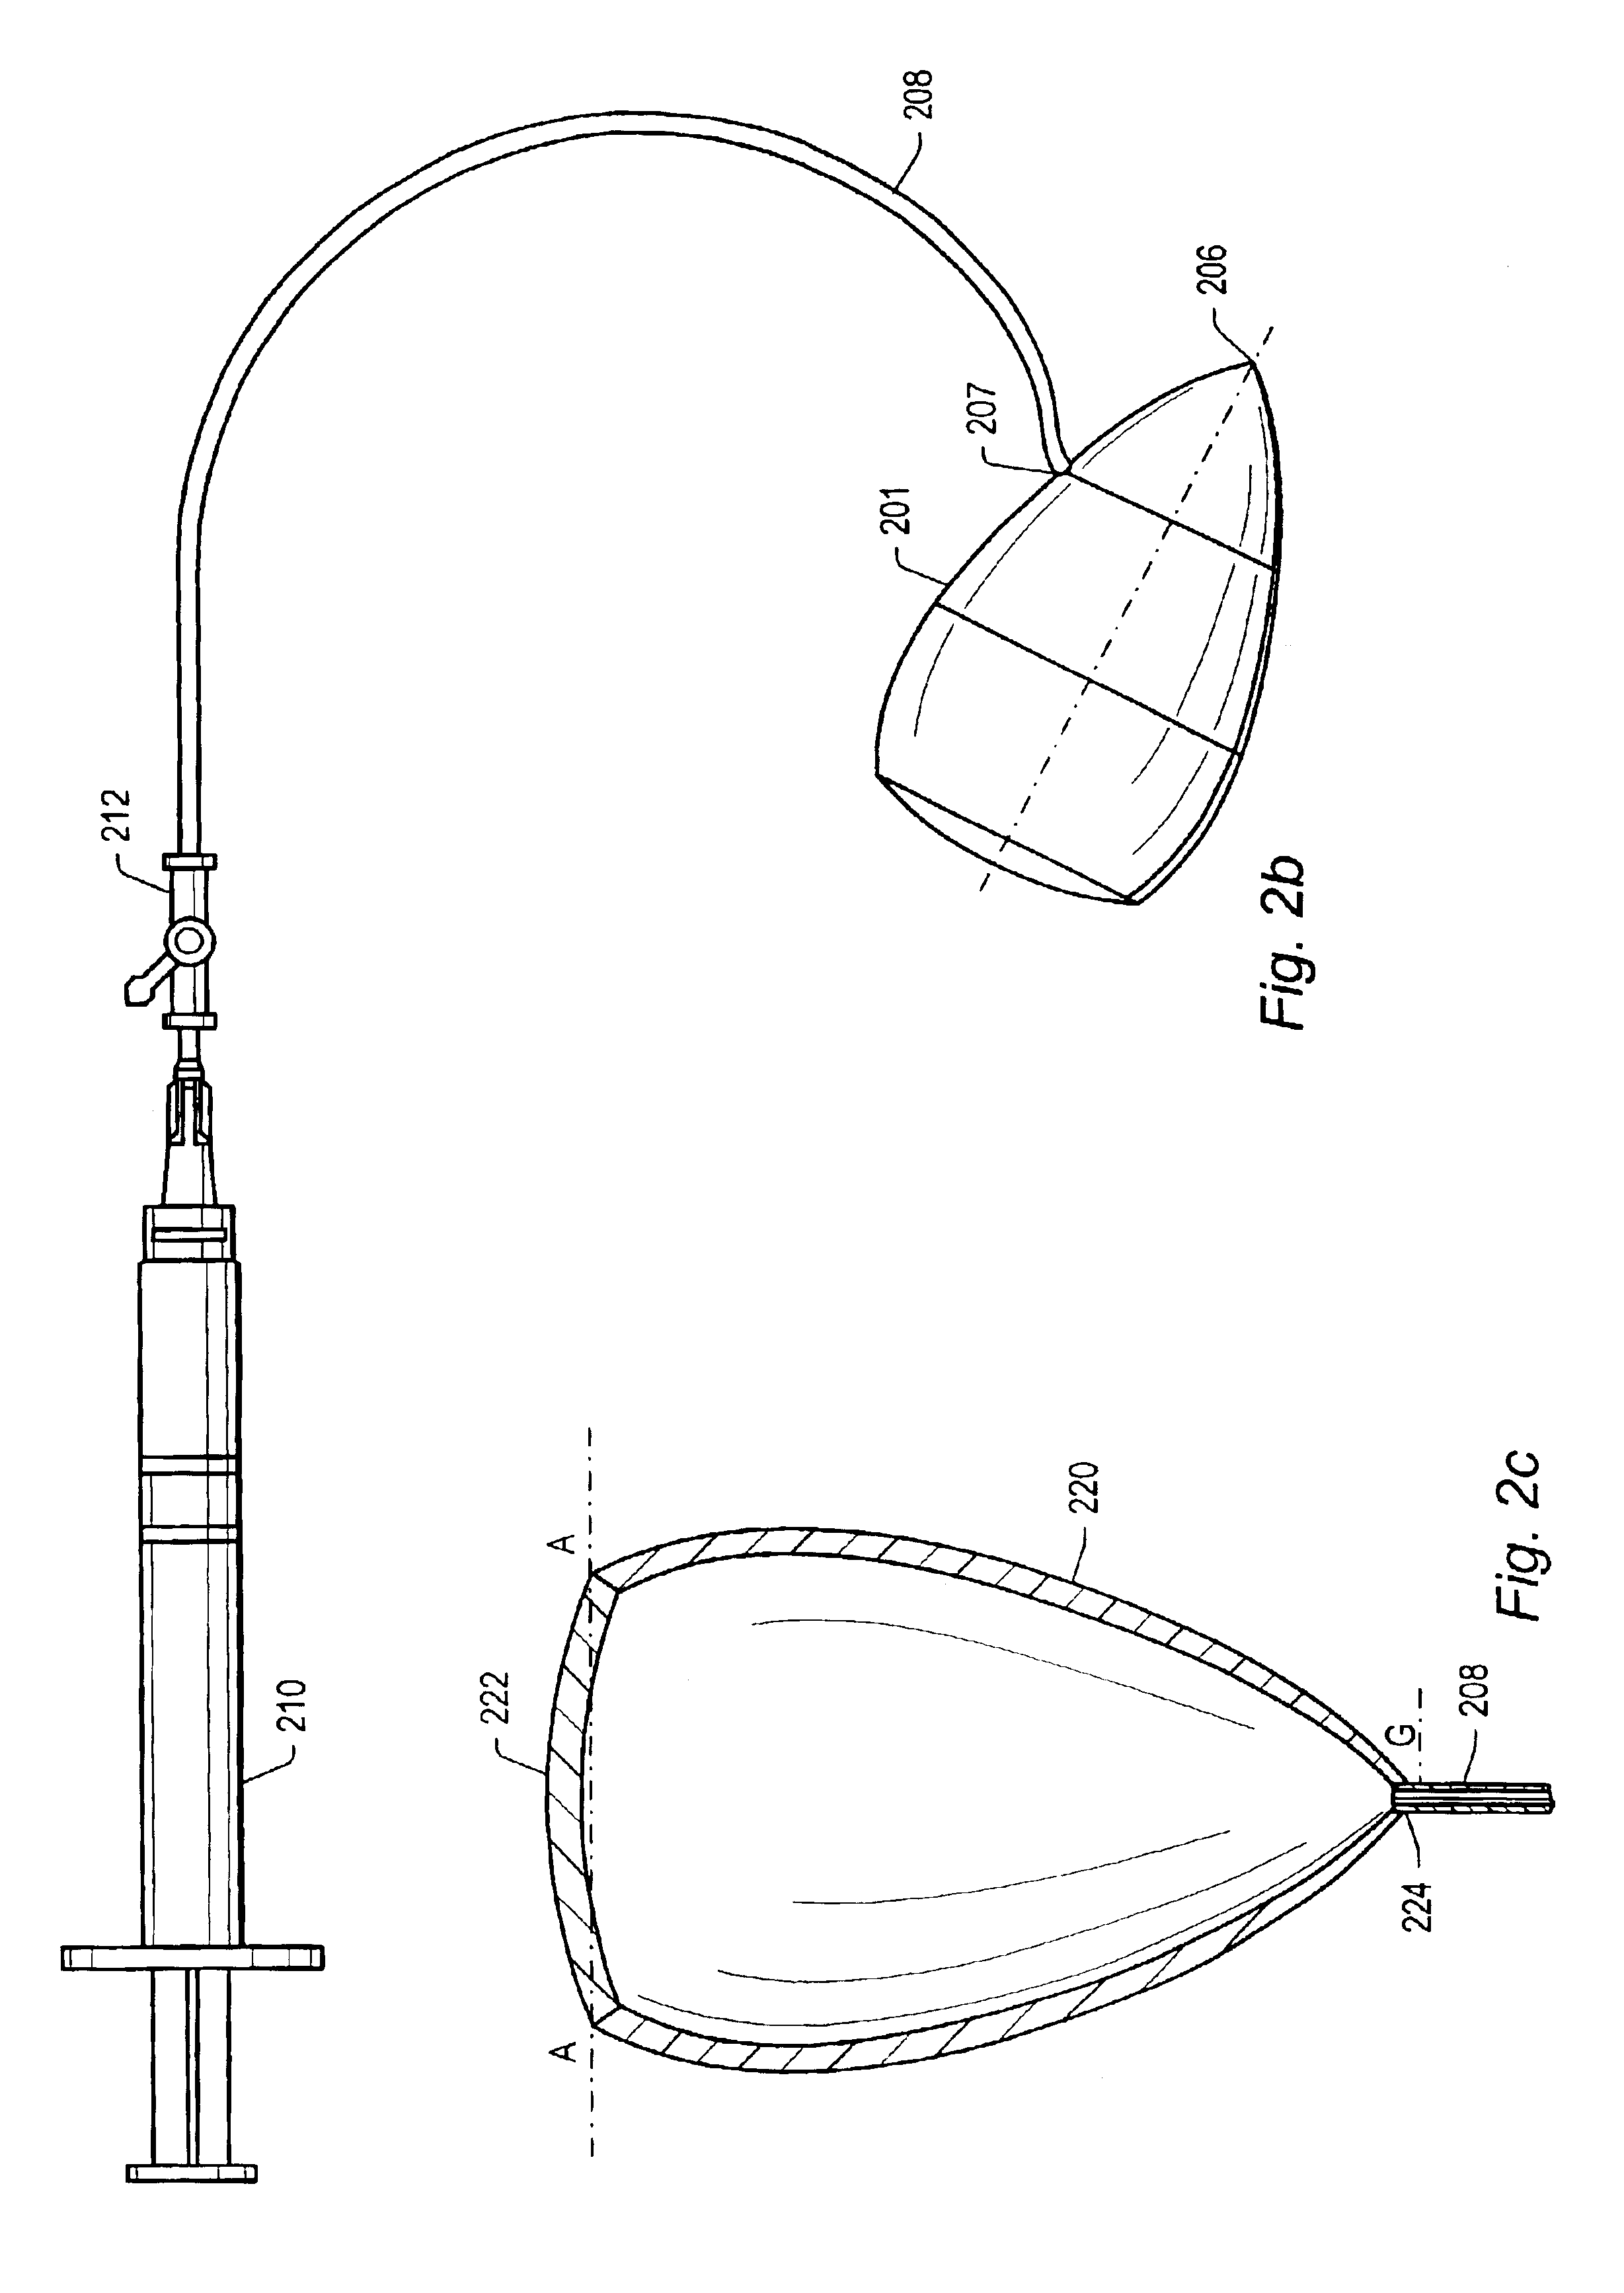 Kit and method for use during ventricular restoration